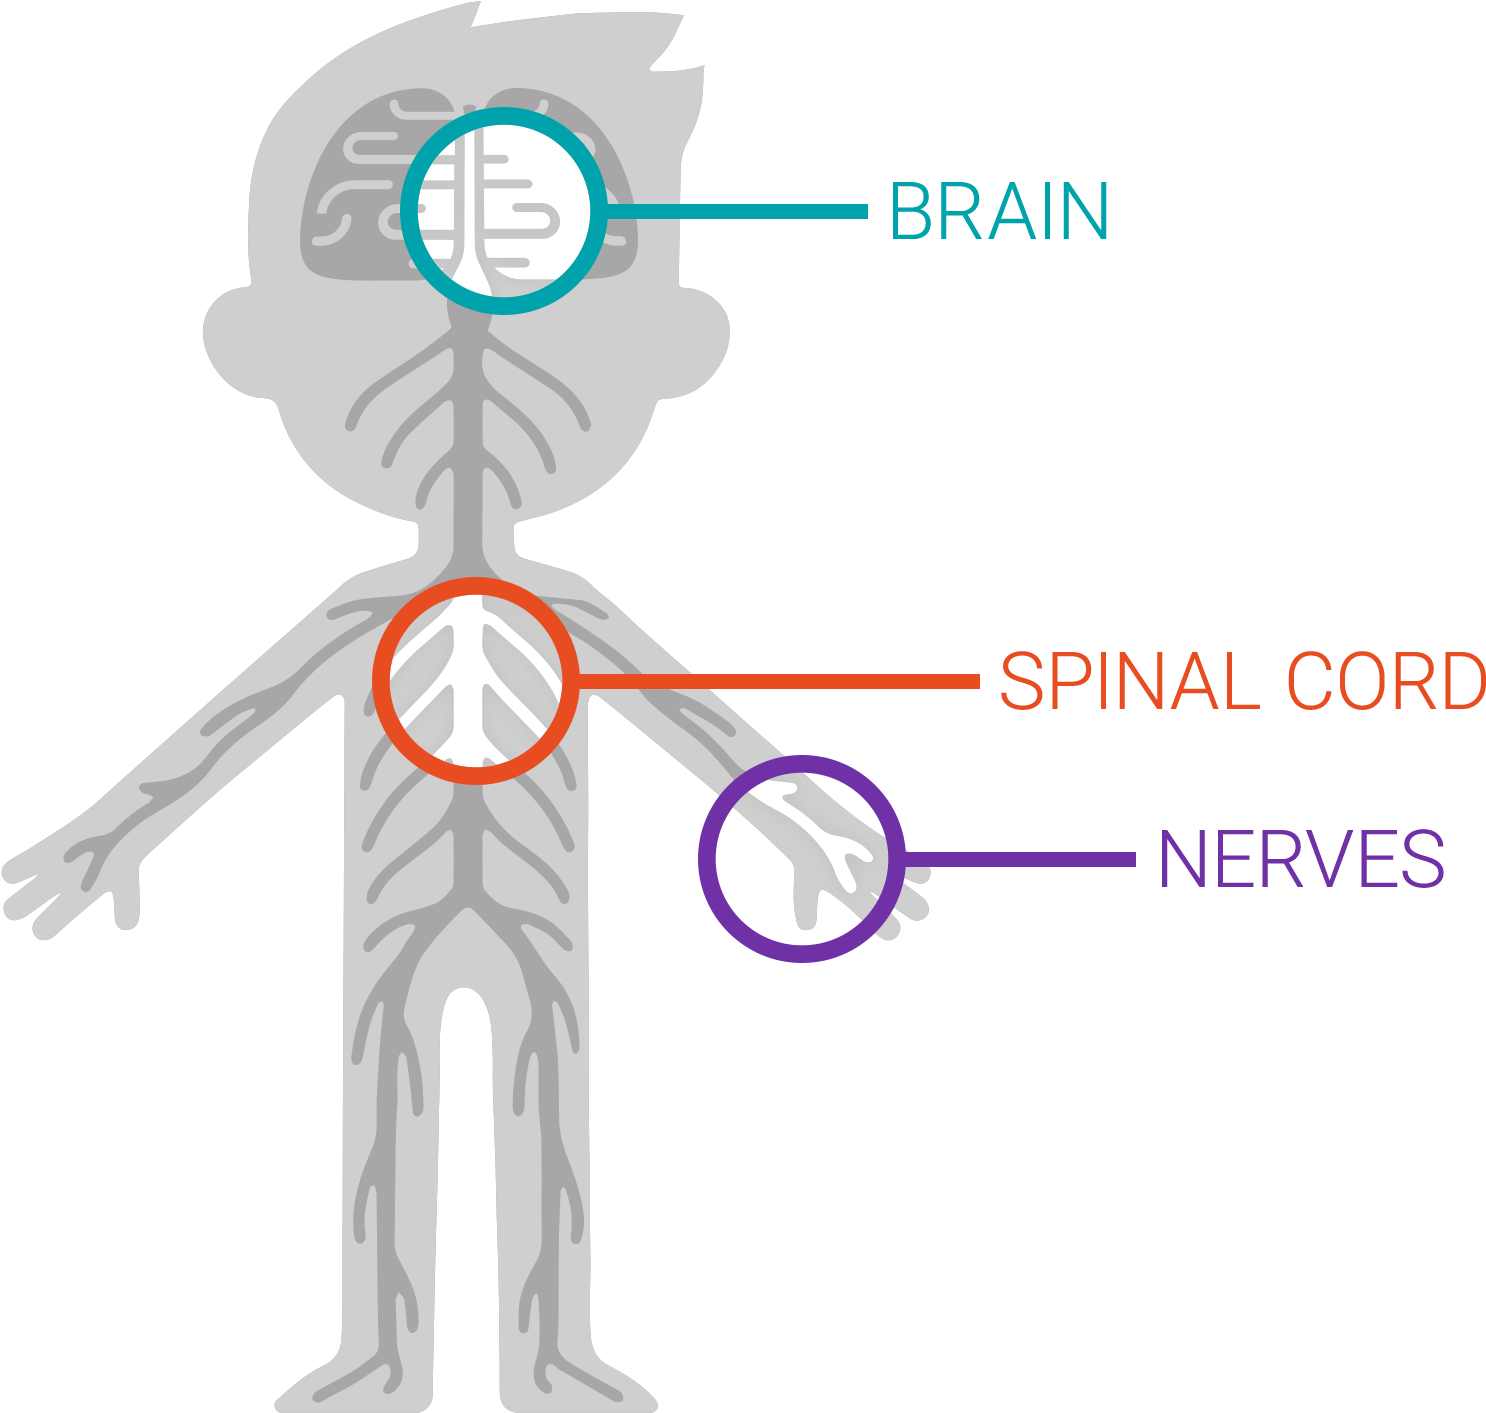 Download The Nervous System - Graphic Design Clipart Png Download - PikPng